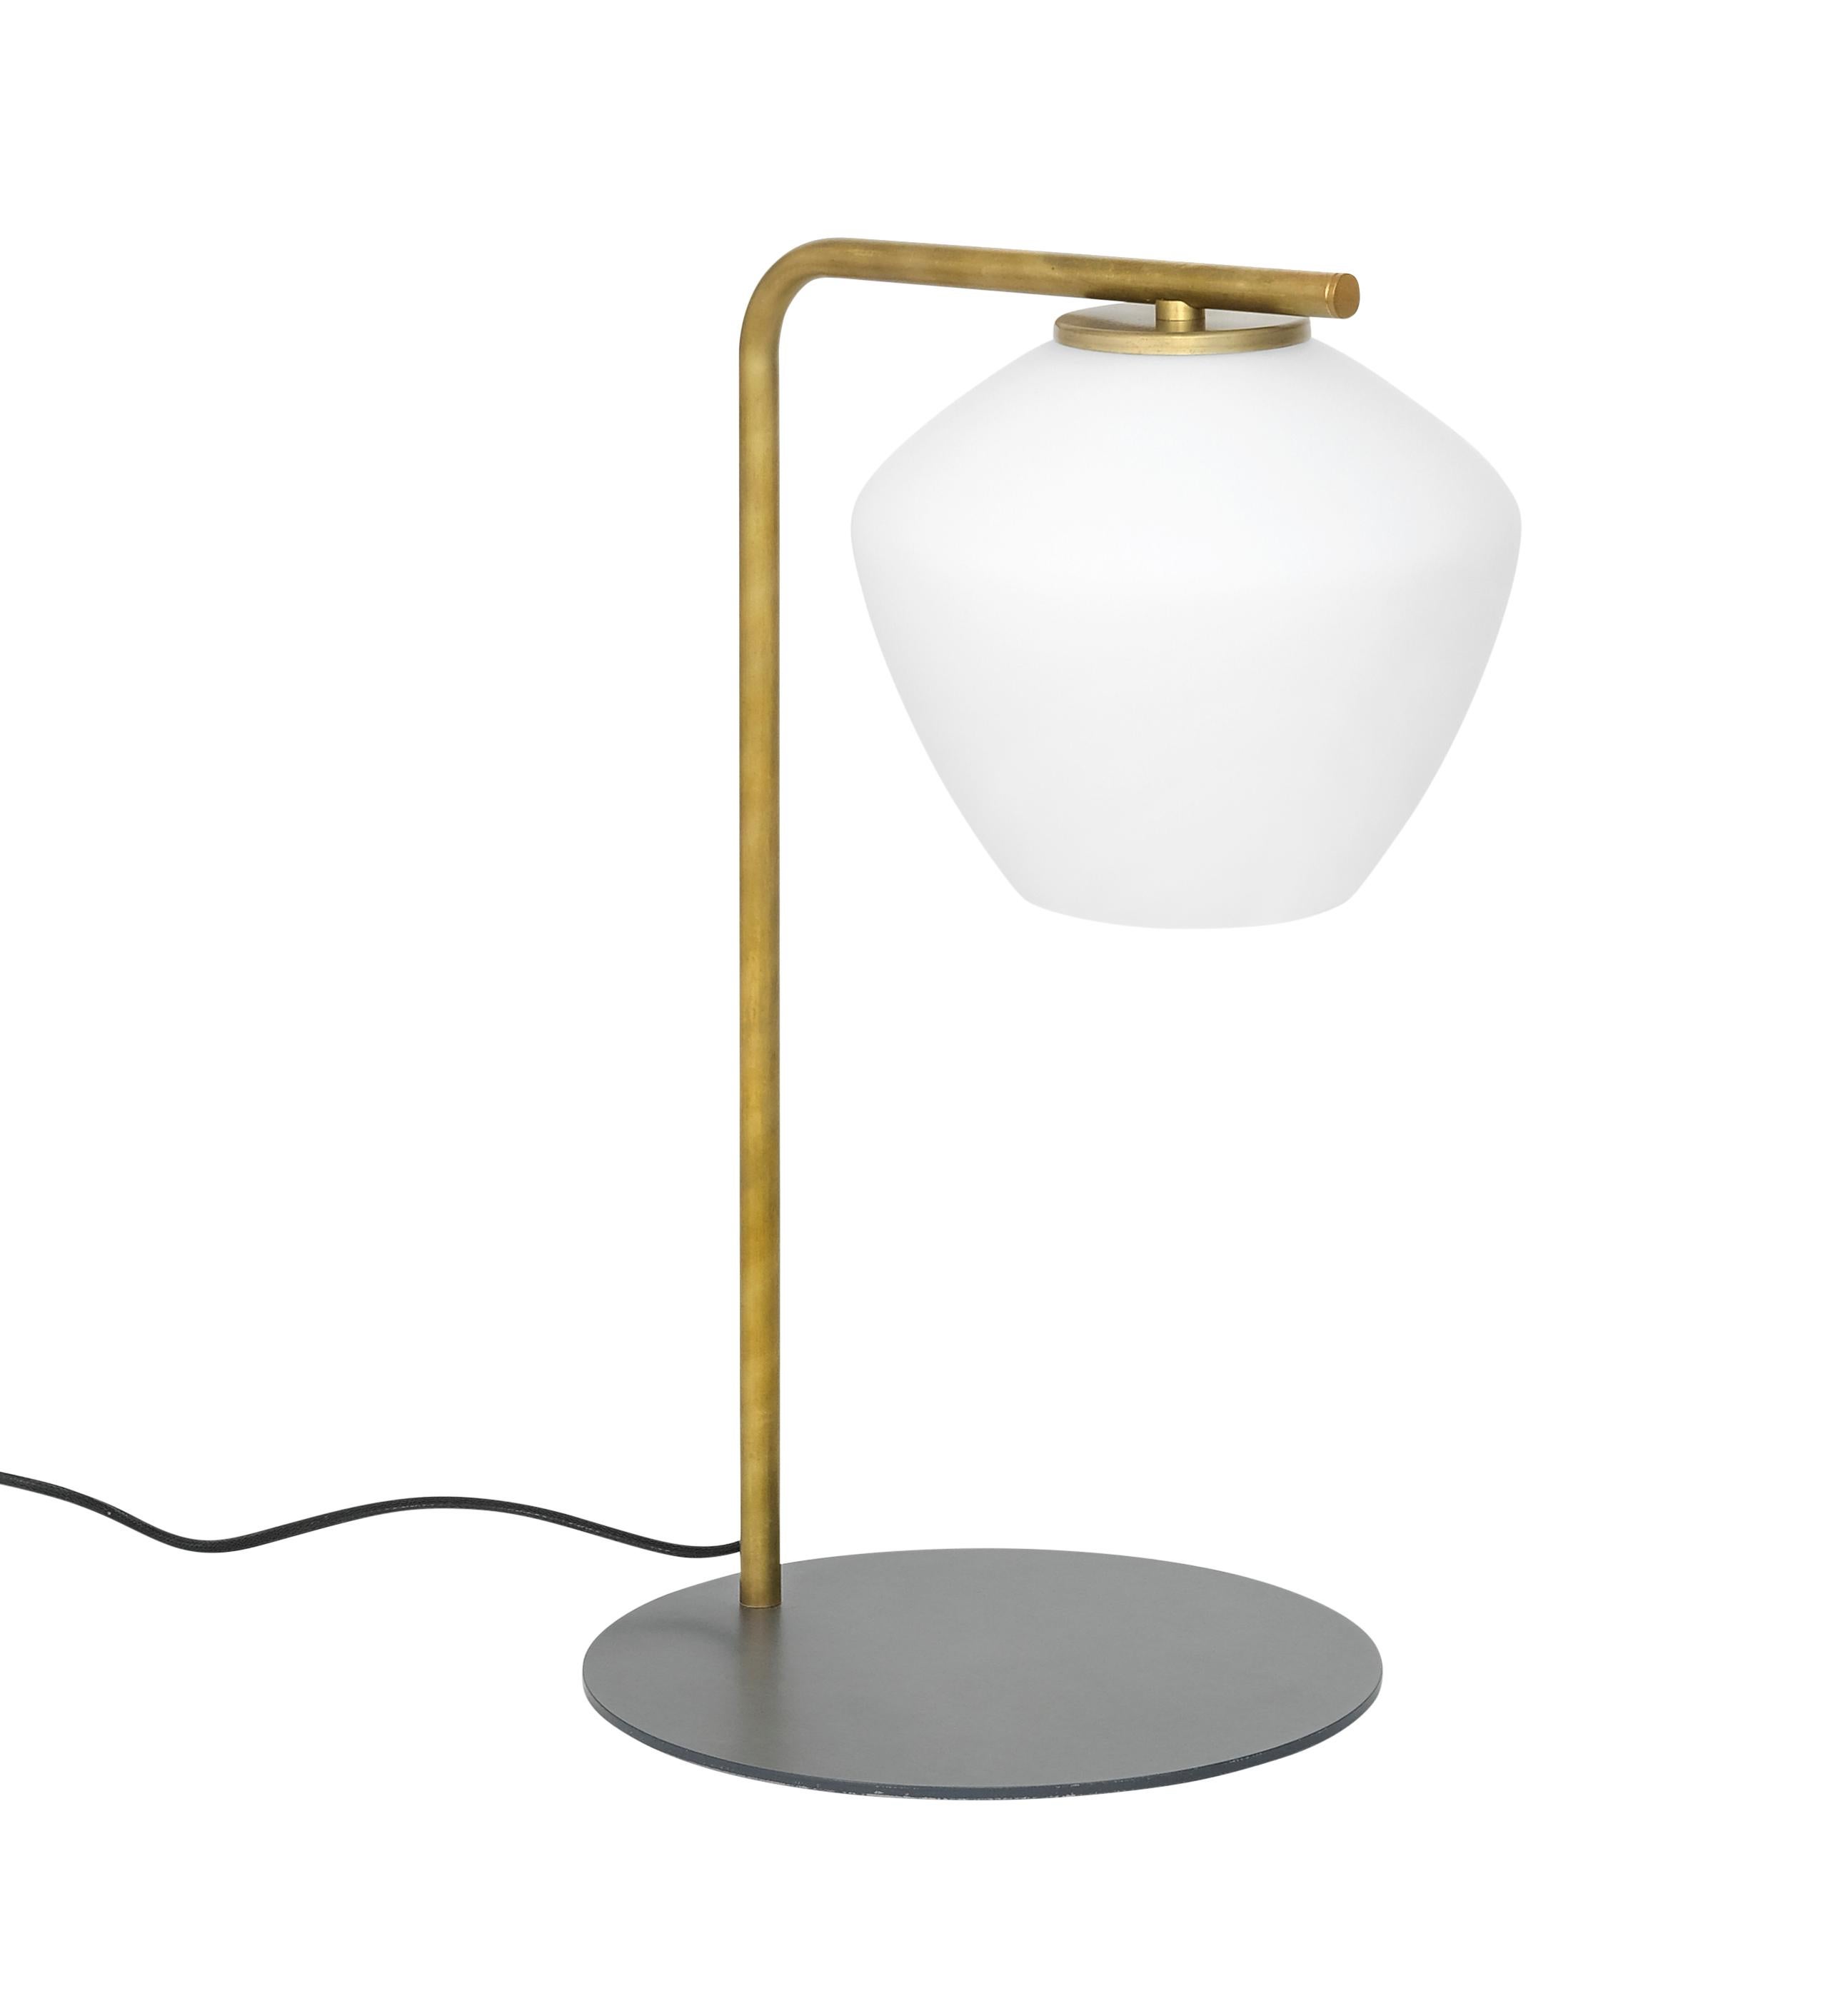 Table lamp model DK designed by Henrik Tengler and manufactured by Konsthantverk.

The production of lamps, wall lights and floor lamps are manufactured using craftsman’s techniques with the same materials and techniques as the first